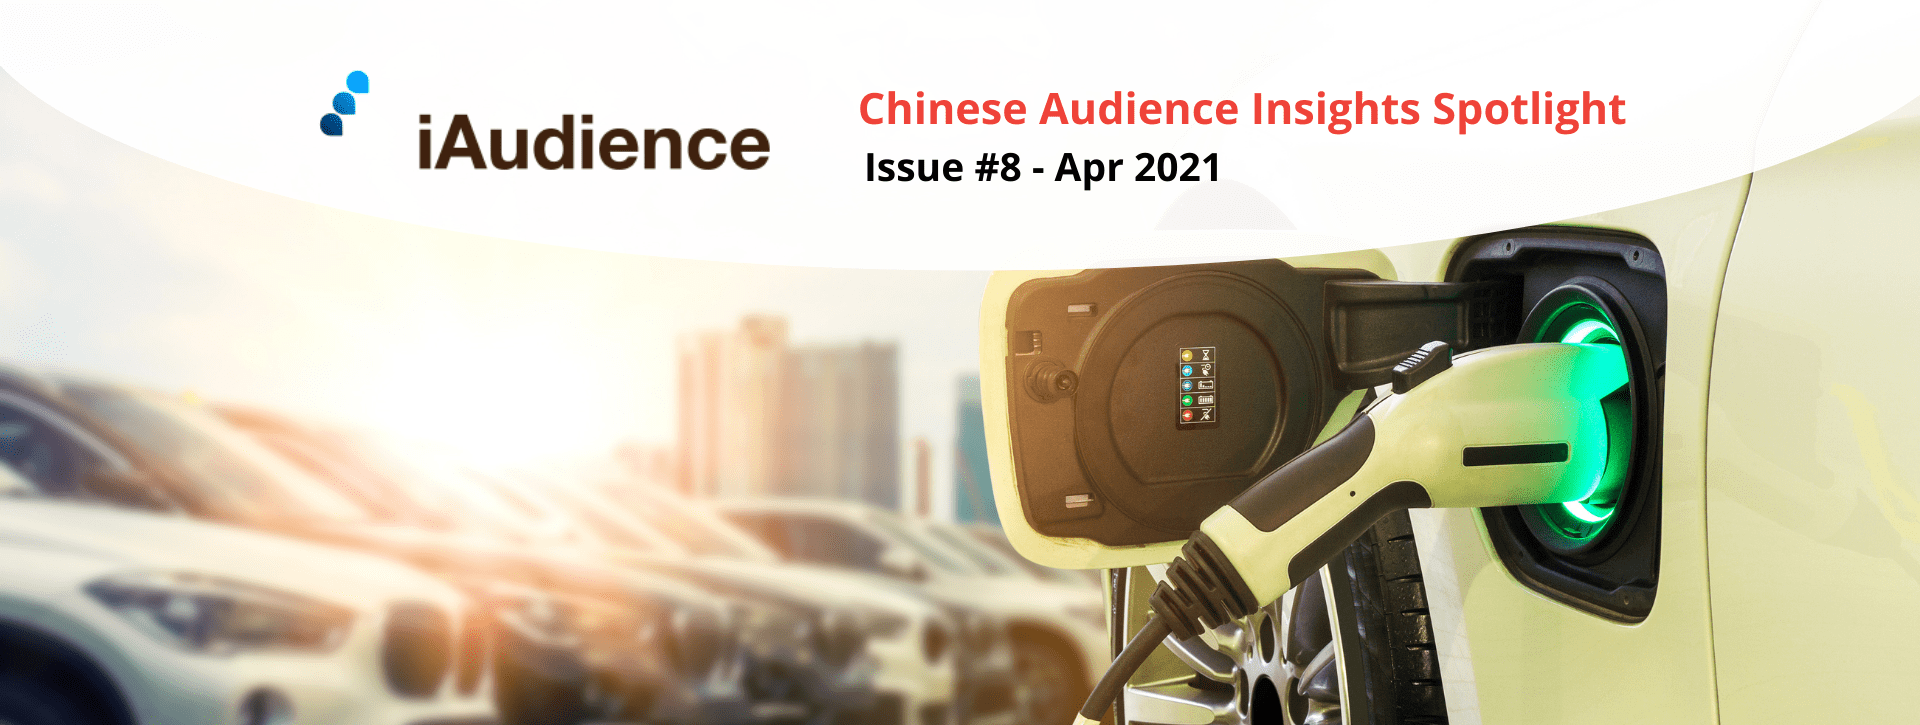 iAudience Insights Spotlight – Issue #8: The Bright Future of China’s Vast and Growing Electric Vehicle Market